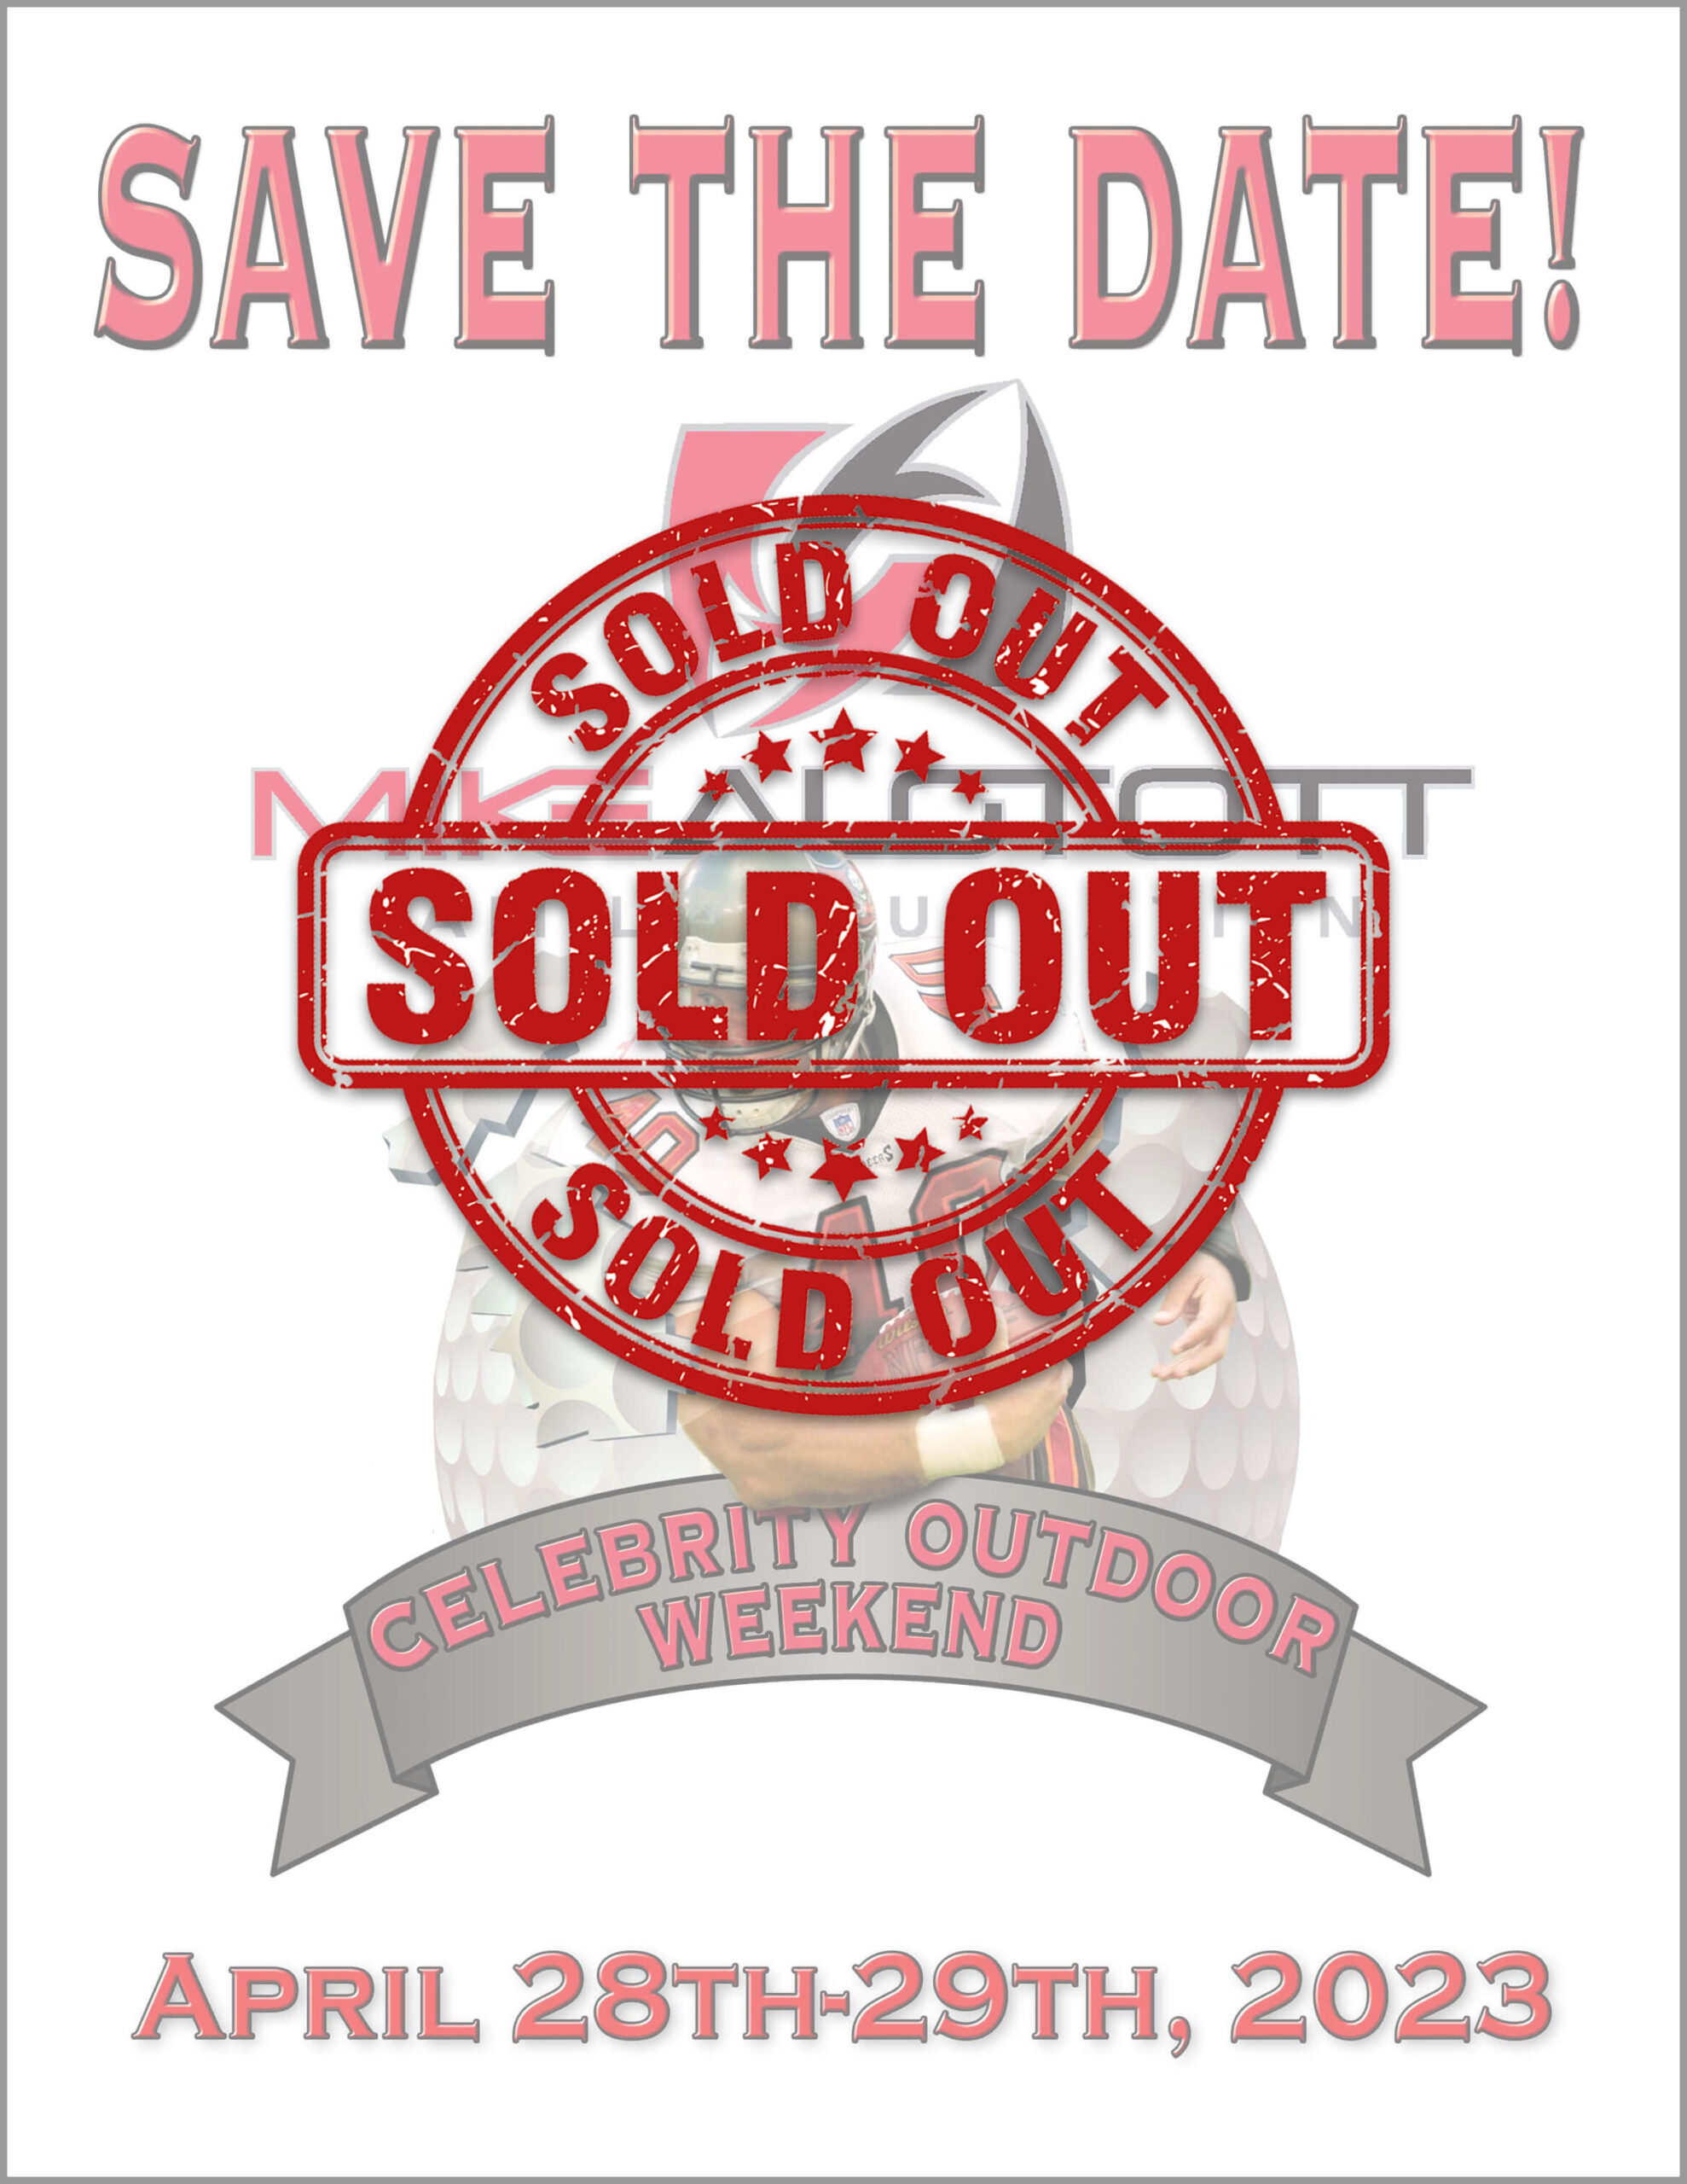 SAVE THE DATE! 2023 Celebrity Outdoor Weekend